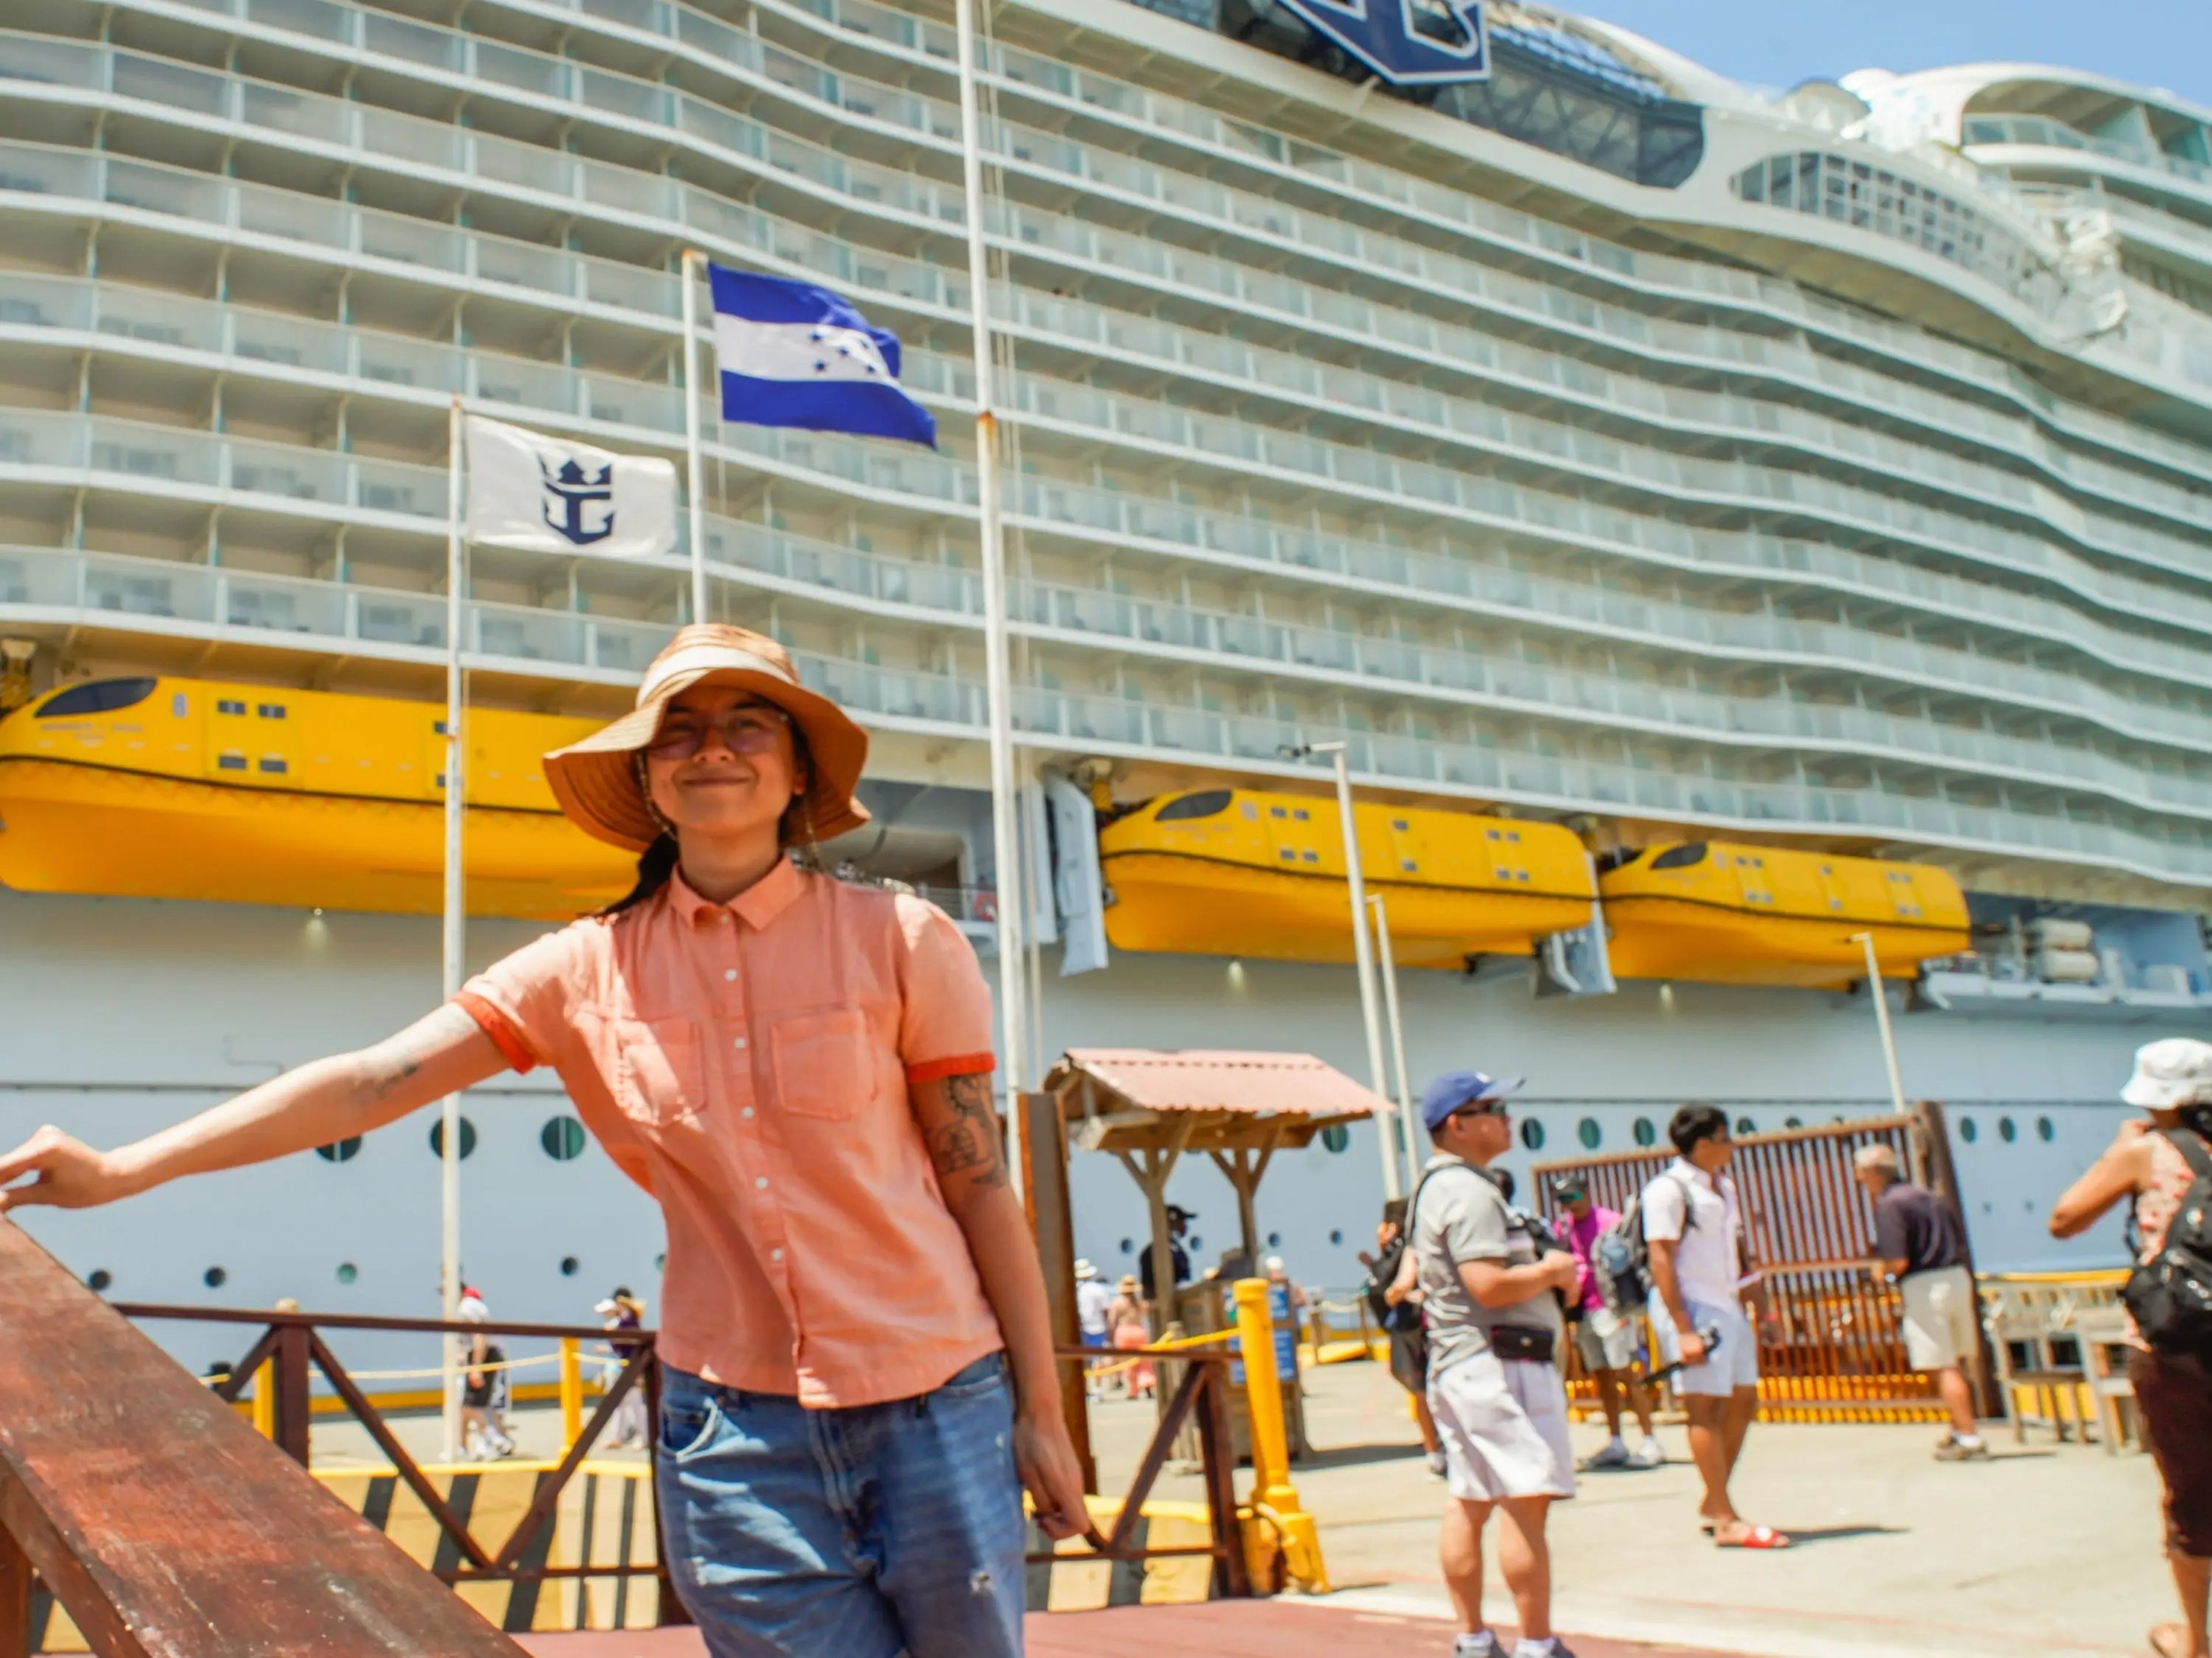 The author in front of the largest cruise ship in the world